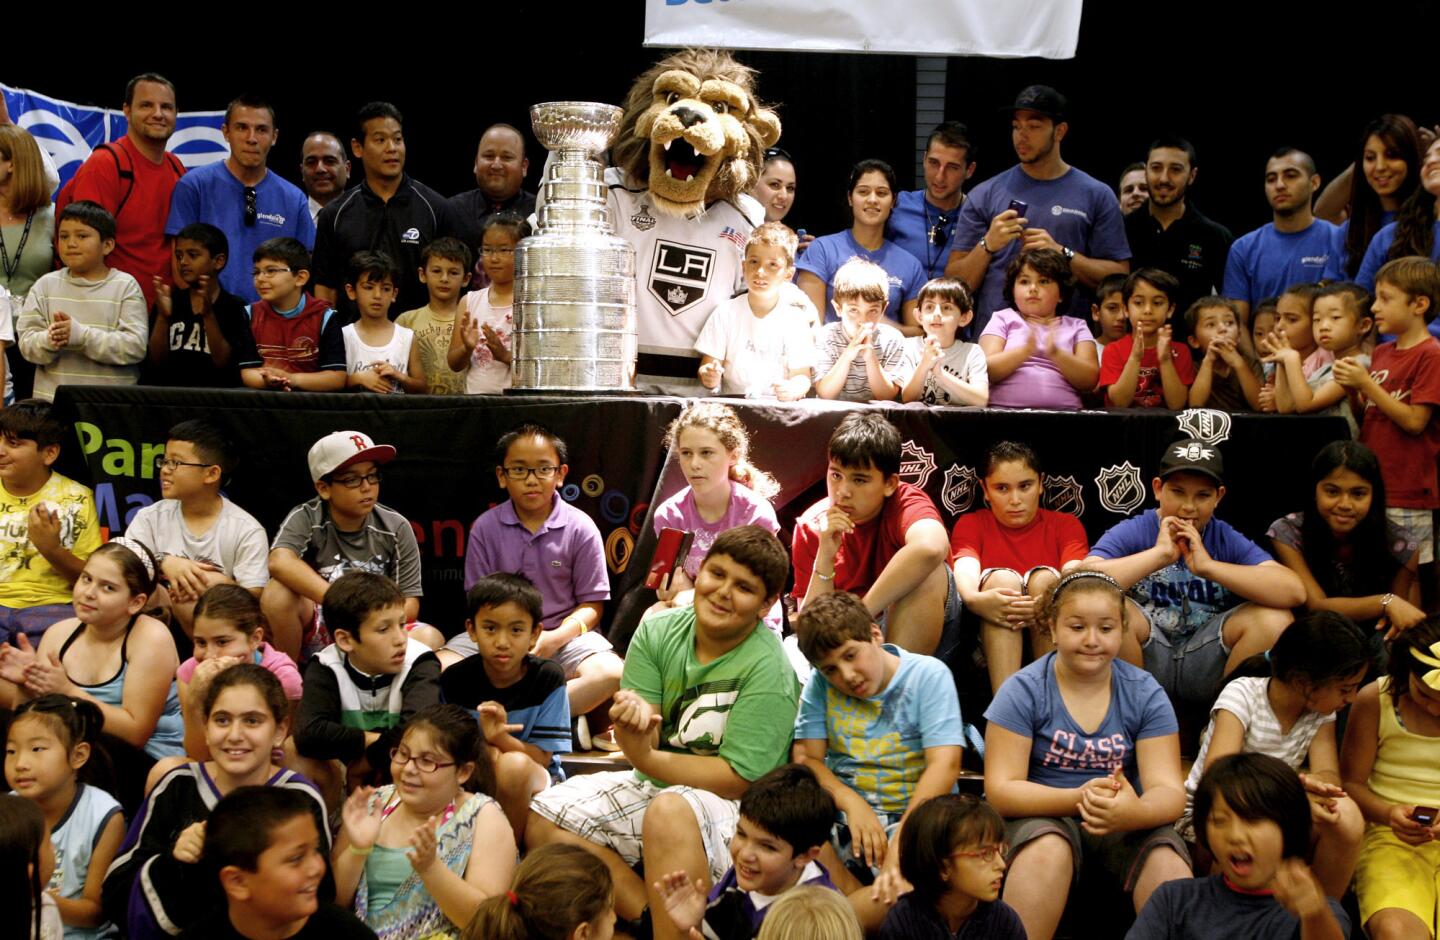 Photo Gallery: Stanley Cup visits Glendale